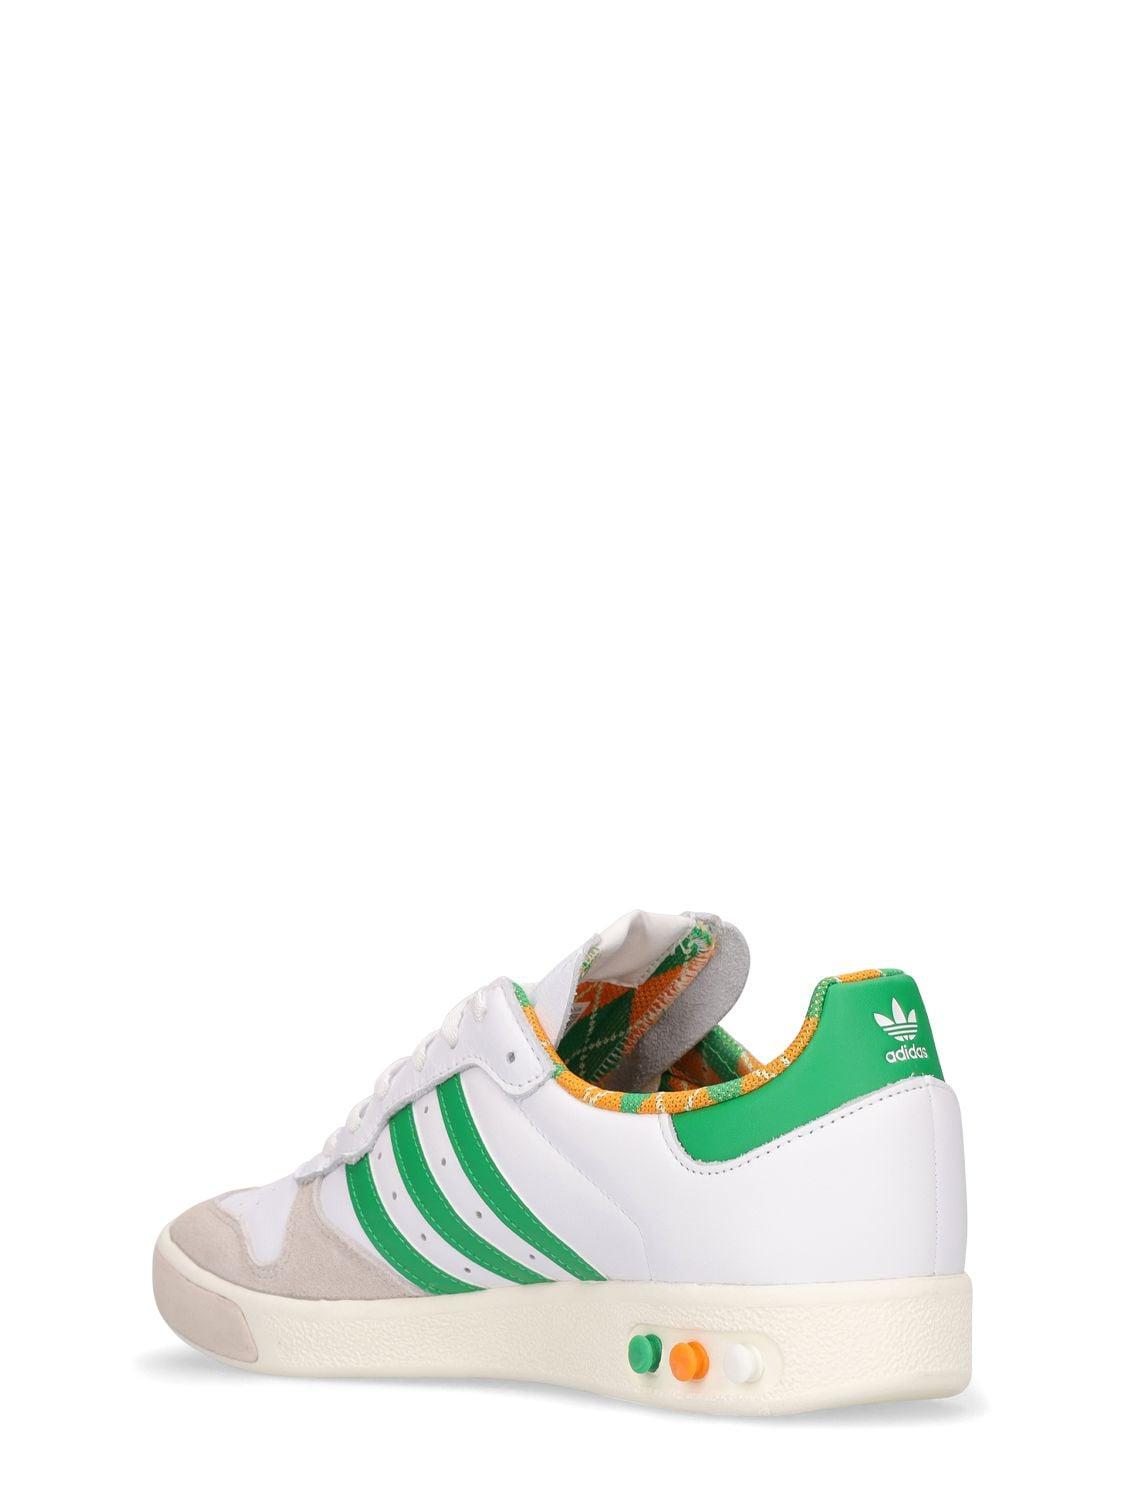 adidas Originals Court Gs Sneakers in White/Green (Green) for Men | Lyst